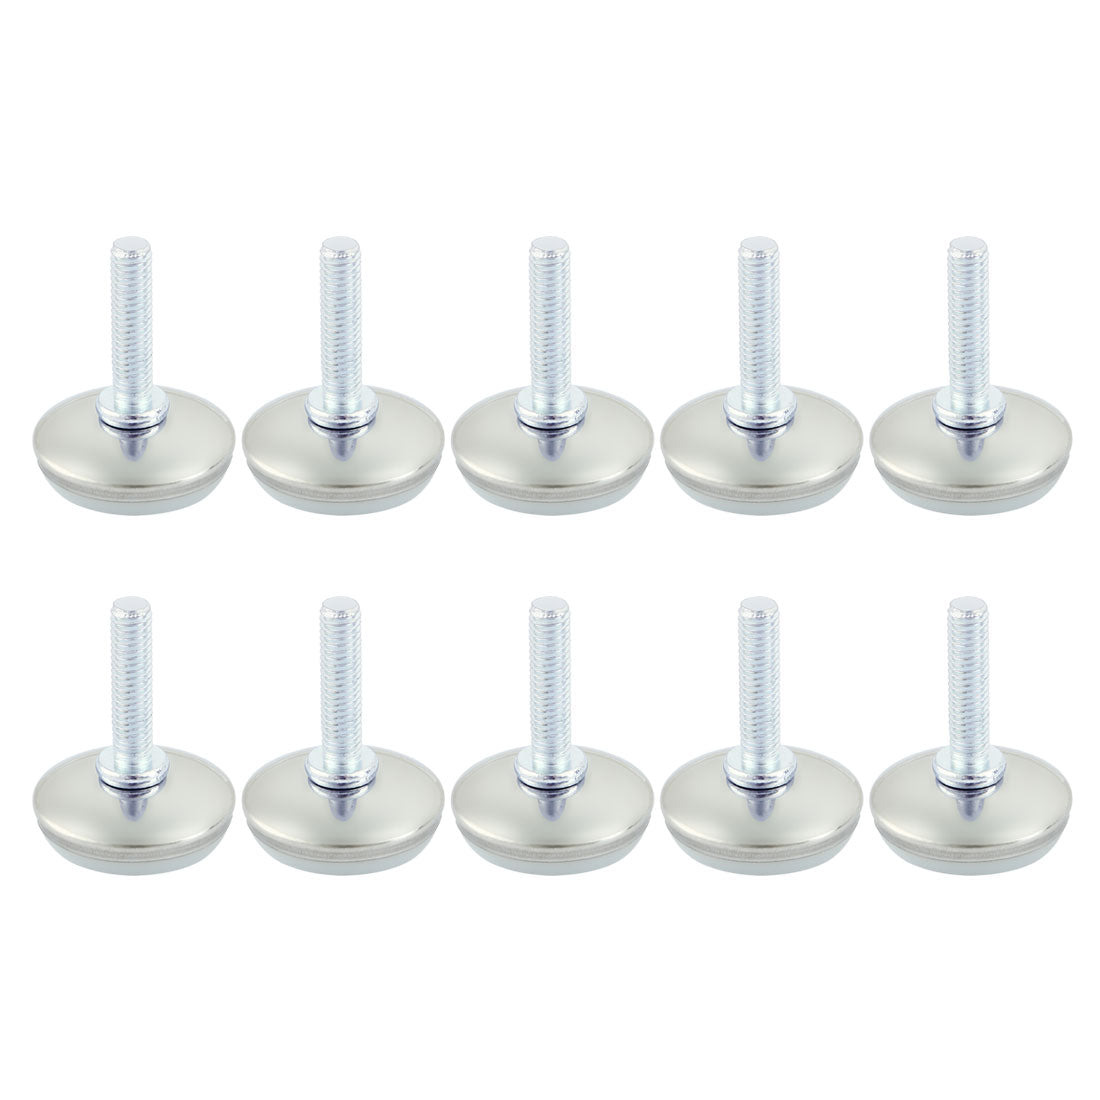 uxcell Uxcell Home Office Adjustable Furniture Glide Leveling Feet 8mm Thread Dia 10 Pcs